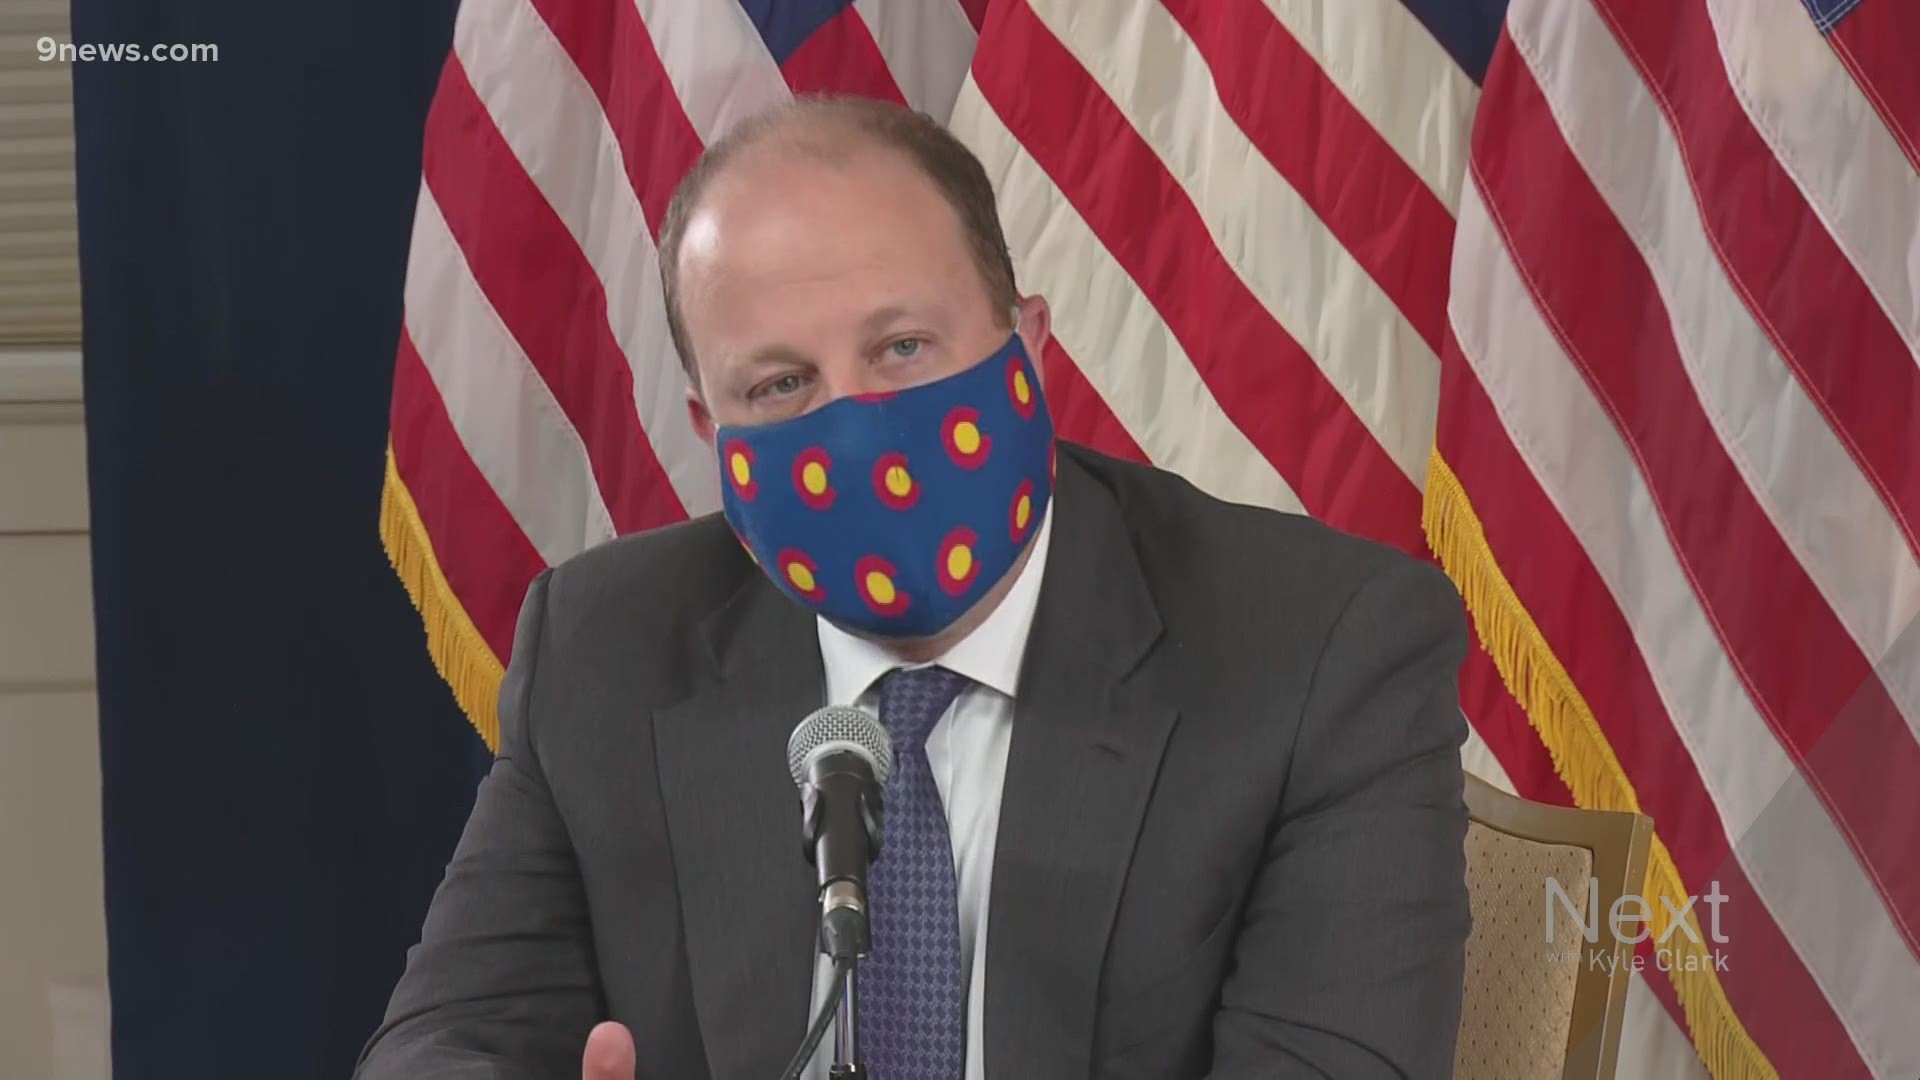 Gov. Polis (D) announced a statewide mask mandate that he previously said was unenforceable and might not help. Some Republicans challenged him within hours.